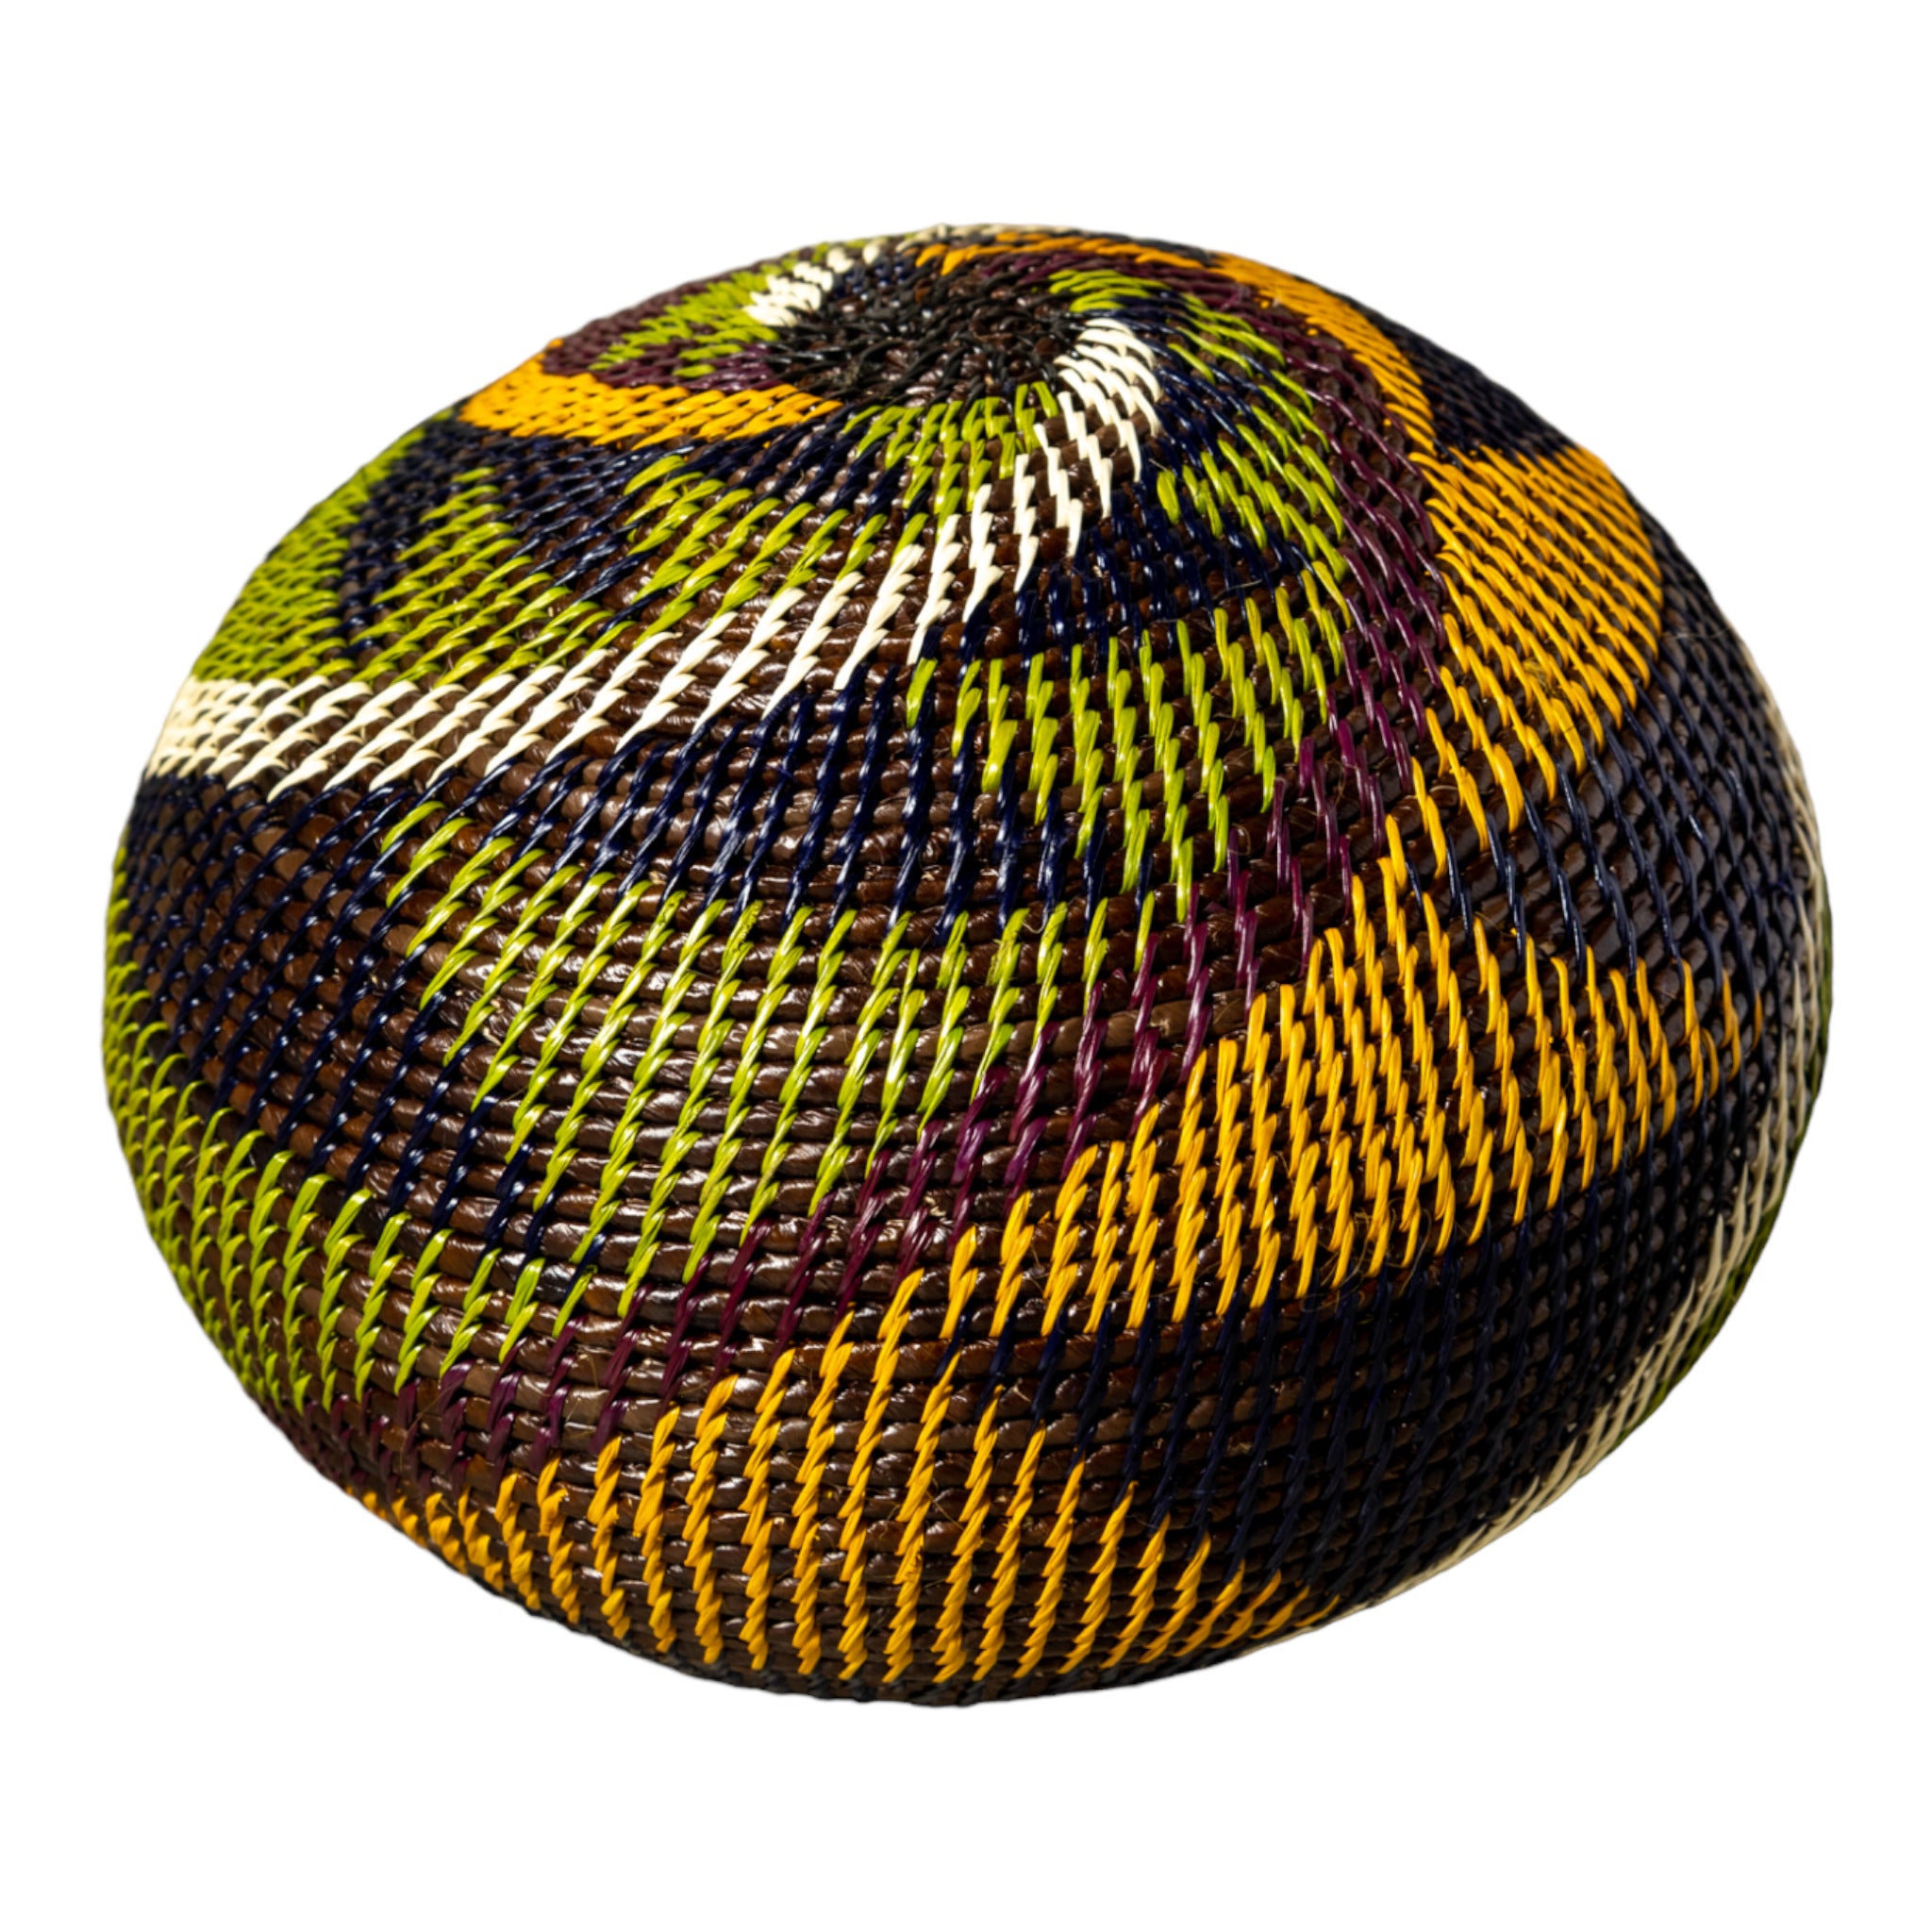 Green Swirl Woven Basket With Top